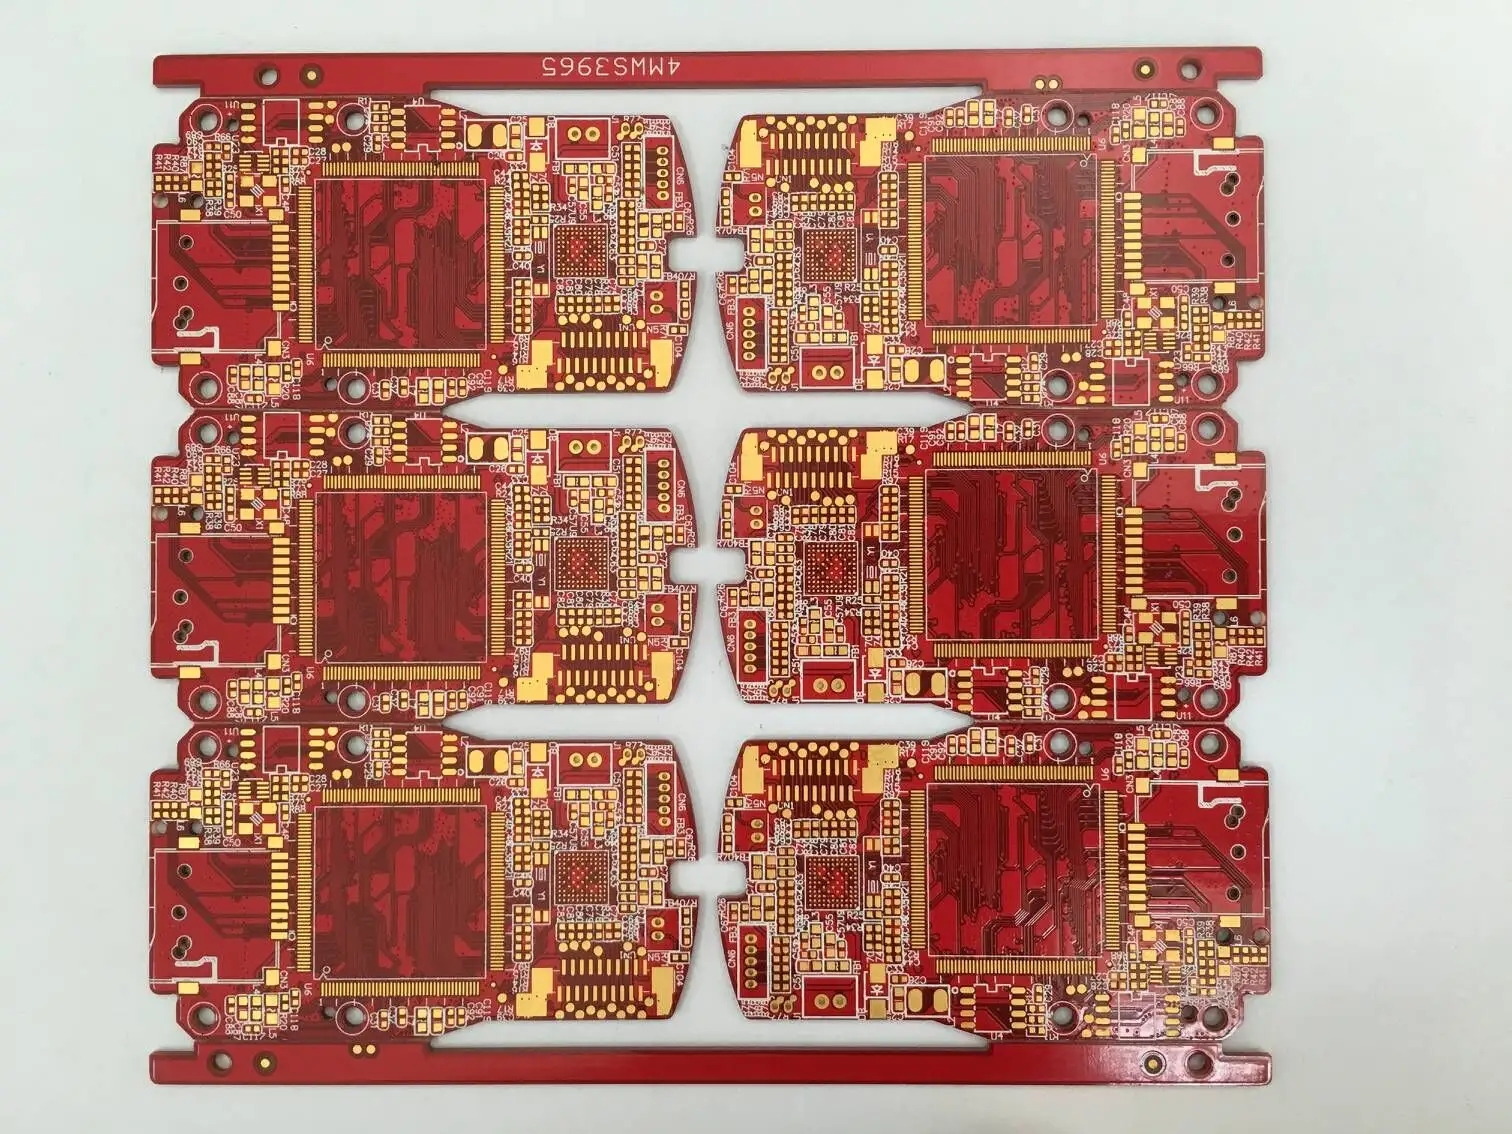 The knowledge of circuit board that high frequency pcb board must master